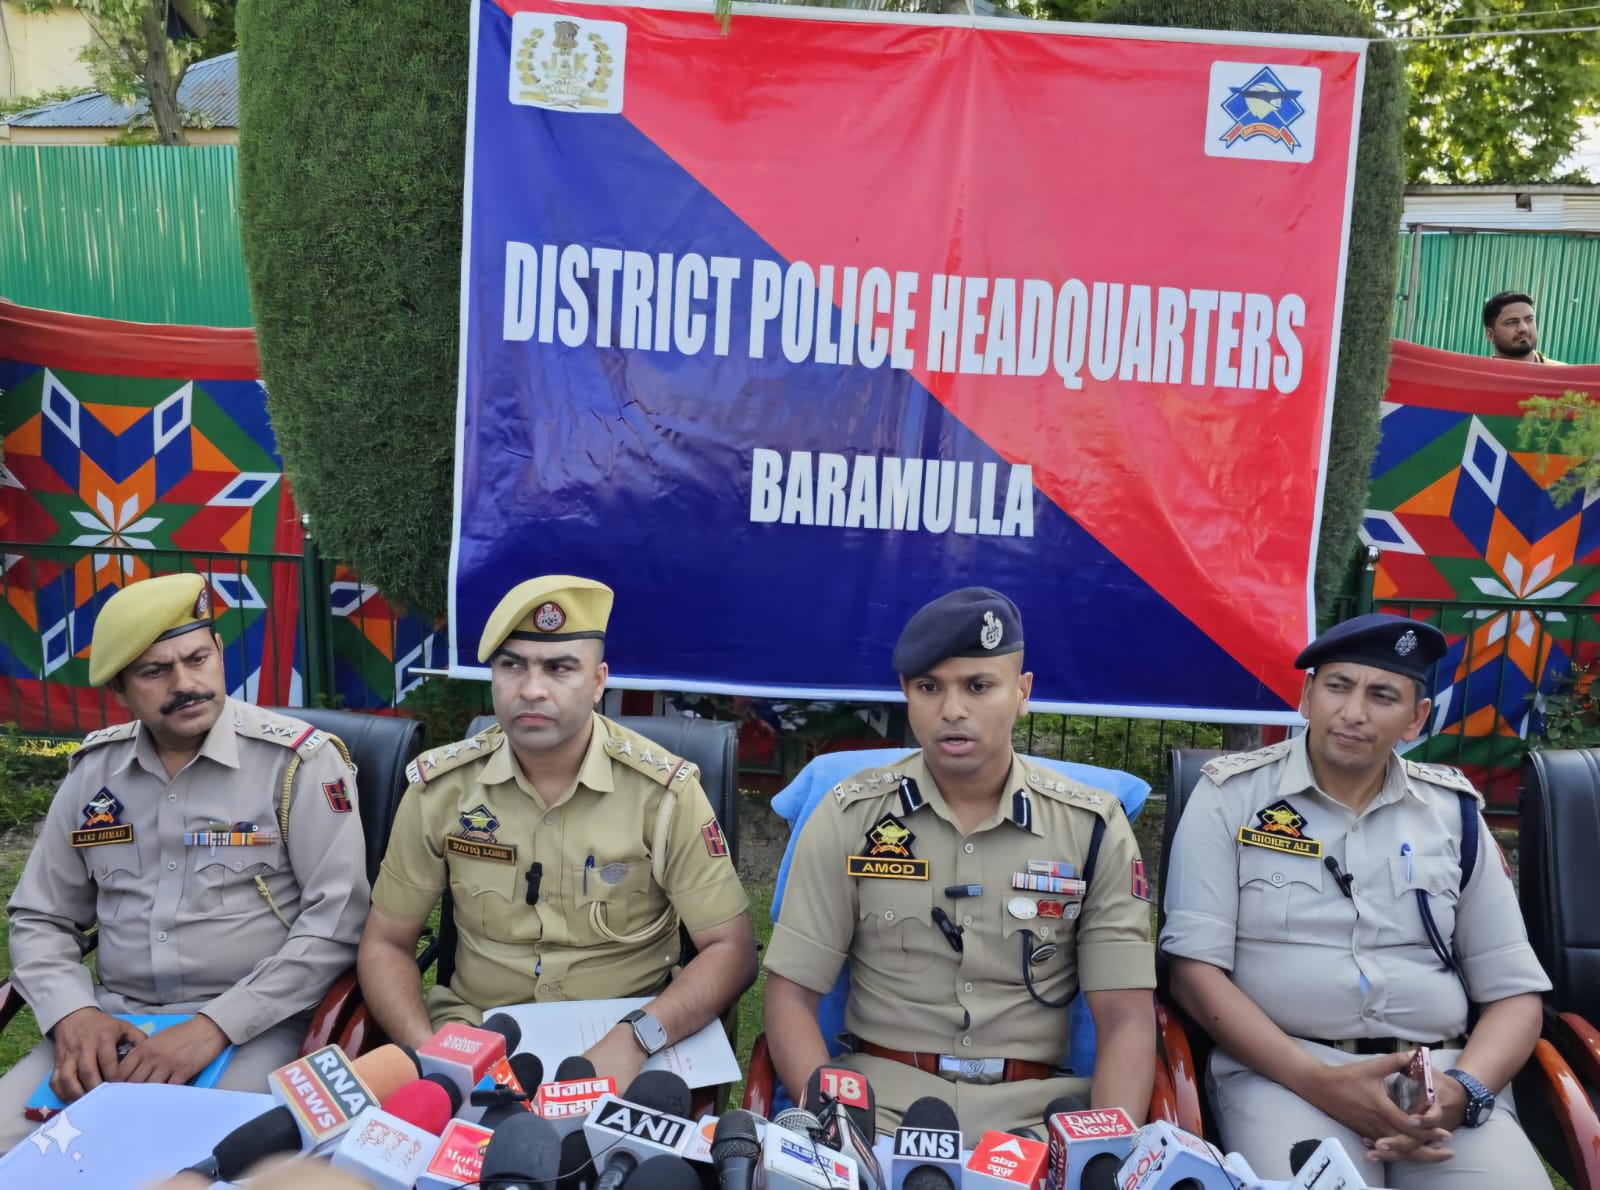 Narco Smmugling Module Busted In Baramulla, Drugs Worth Rs 50 Crore, Cash Recovered: Police